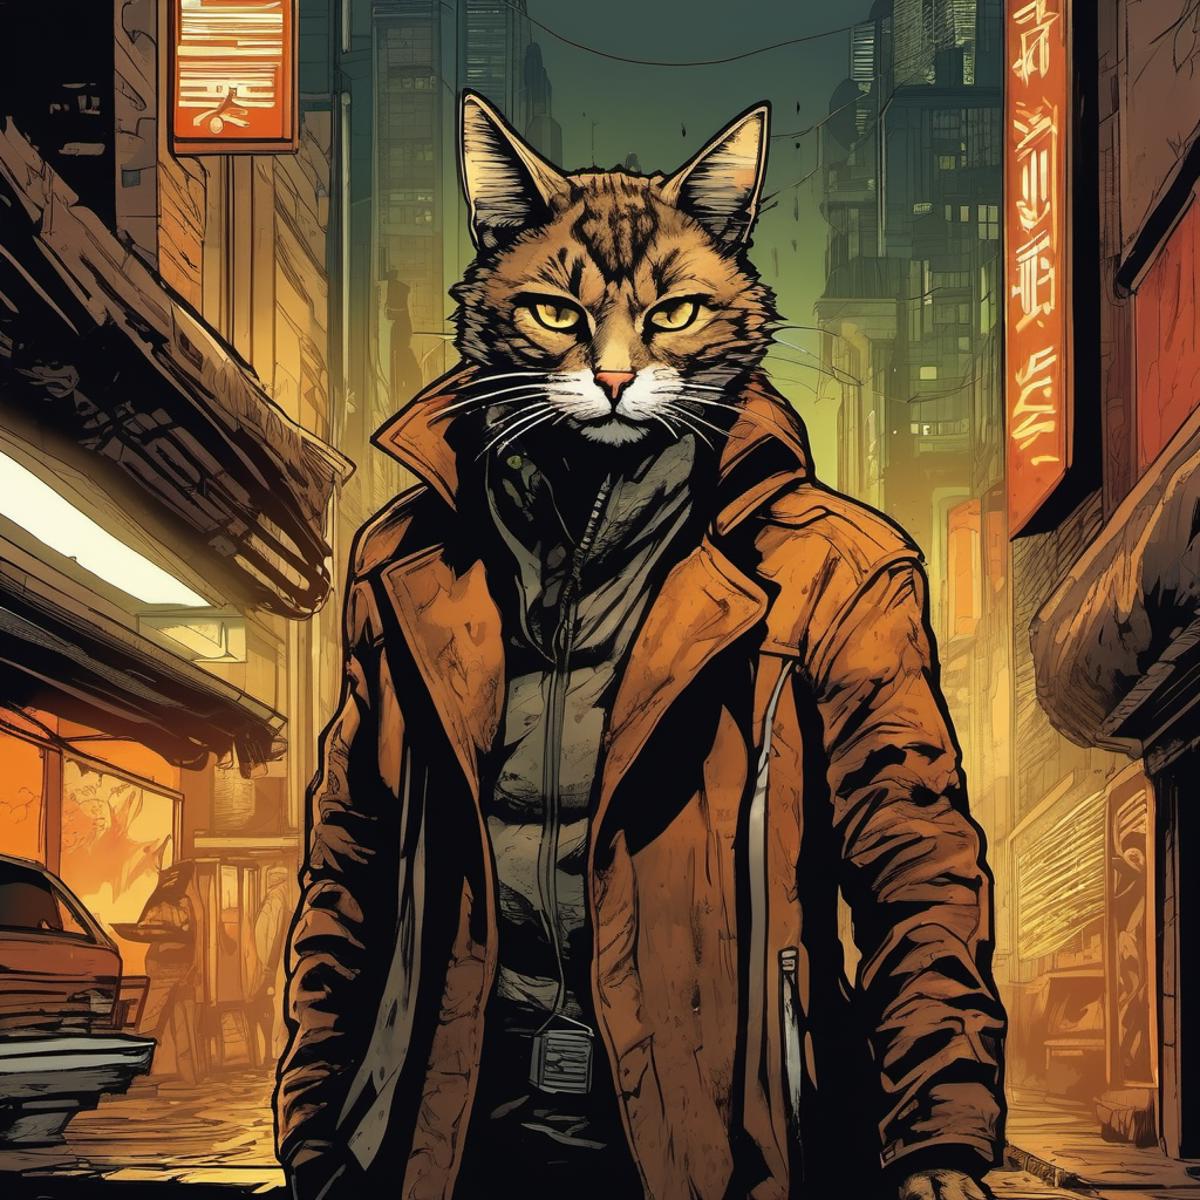 A cartoon man wearing a brown coat and a cat head is standing on a city street.